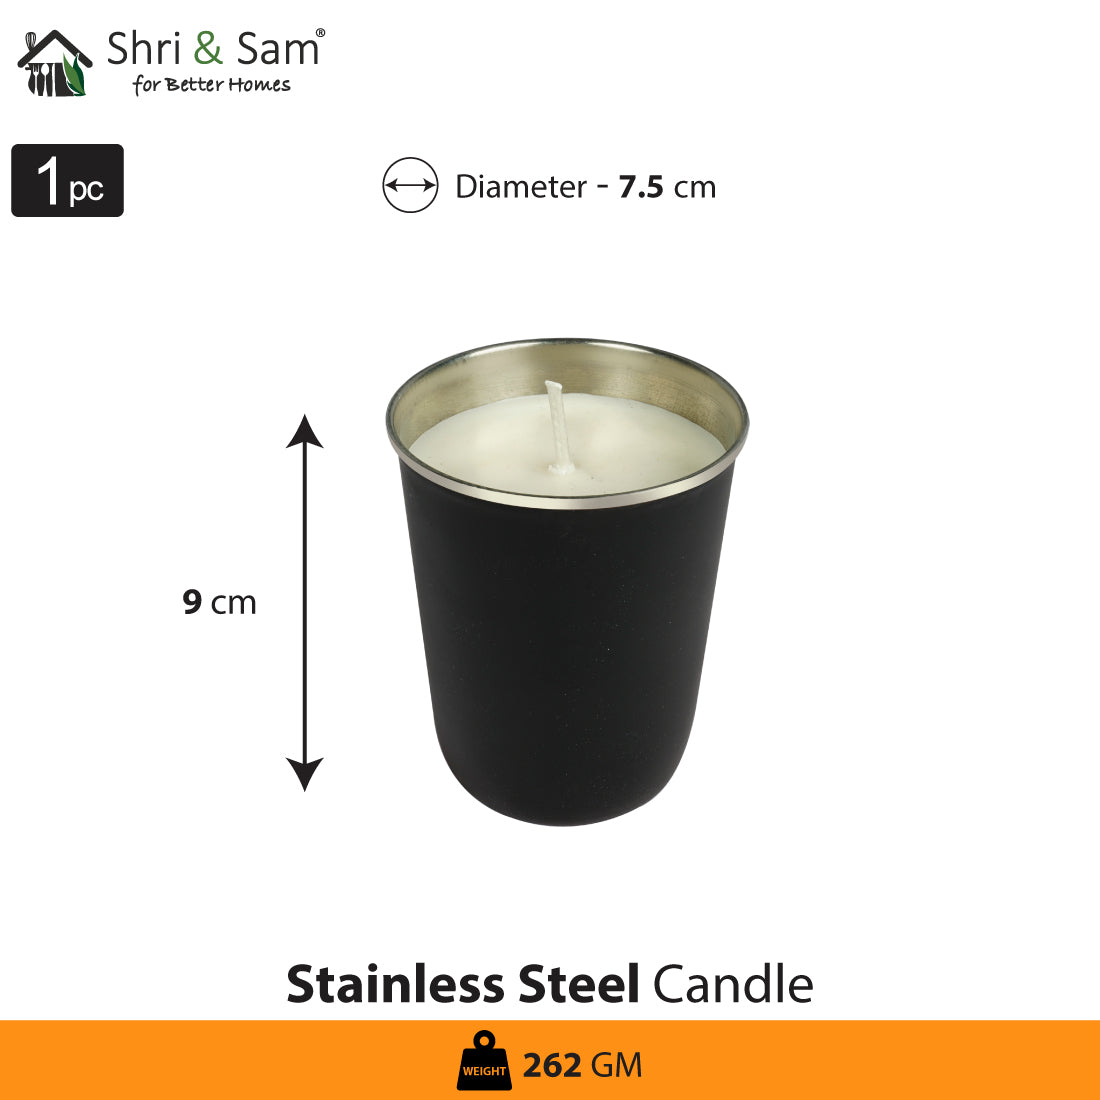 Stainless Steel Single Wick Glass Candle